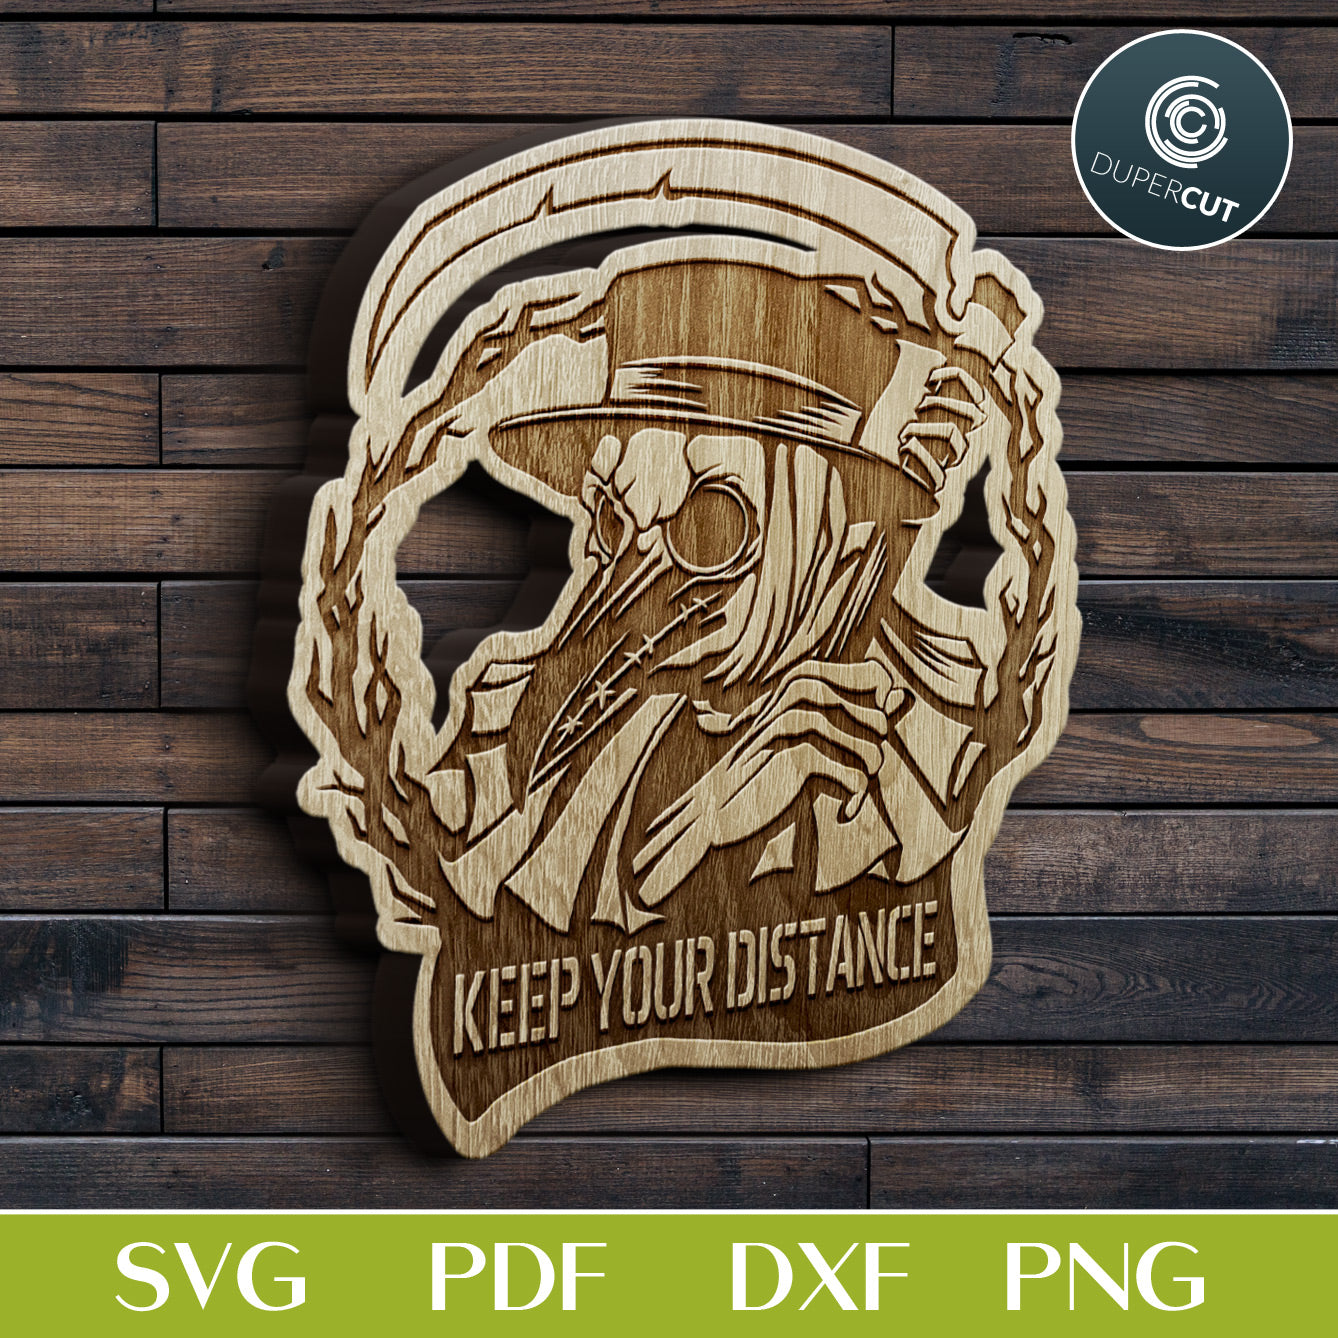 Plague doctor sign with scythe, black custom covid sign - SVG DXF PDF files for laser engraving Glowforge, CNC machines